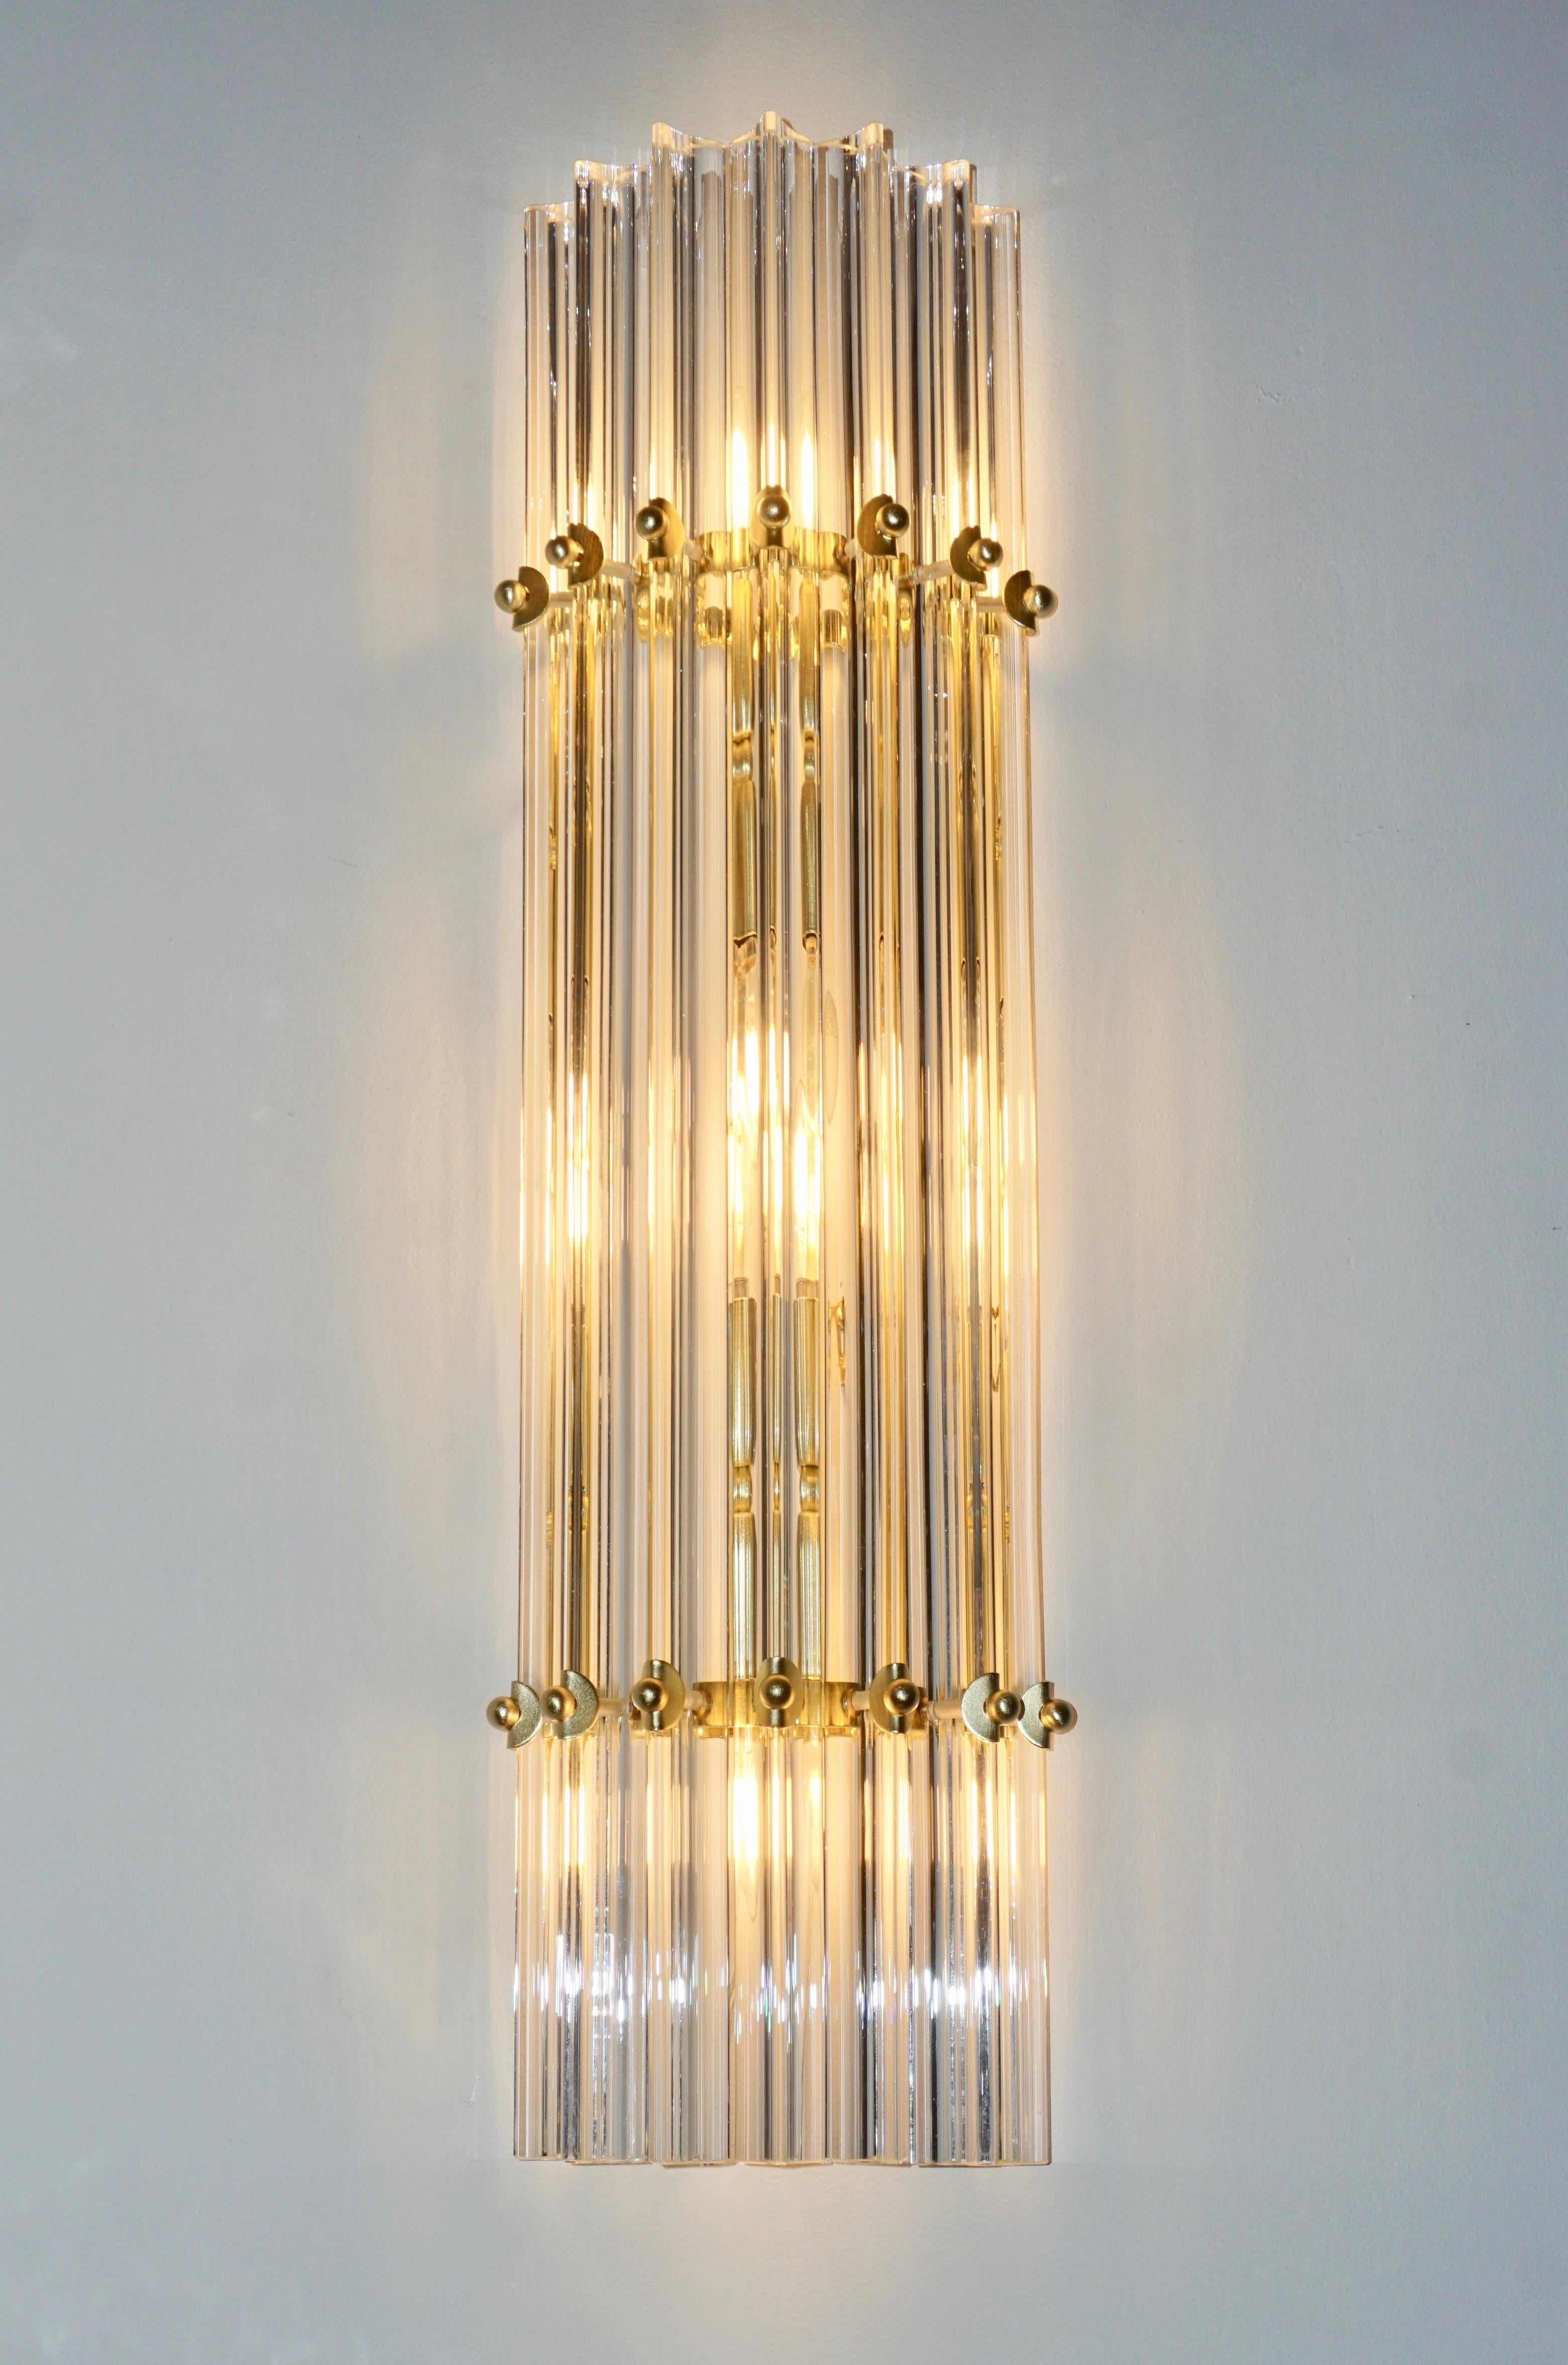 Italian Contemporary Minimalist Pair of Satin Brass Crystal Murano Glass Sconces For Sale 1